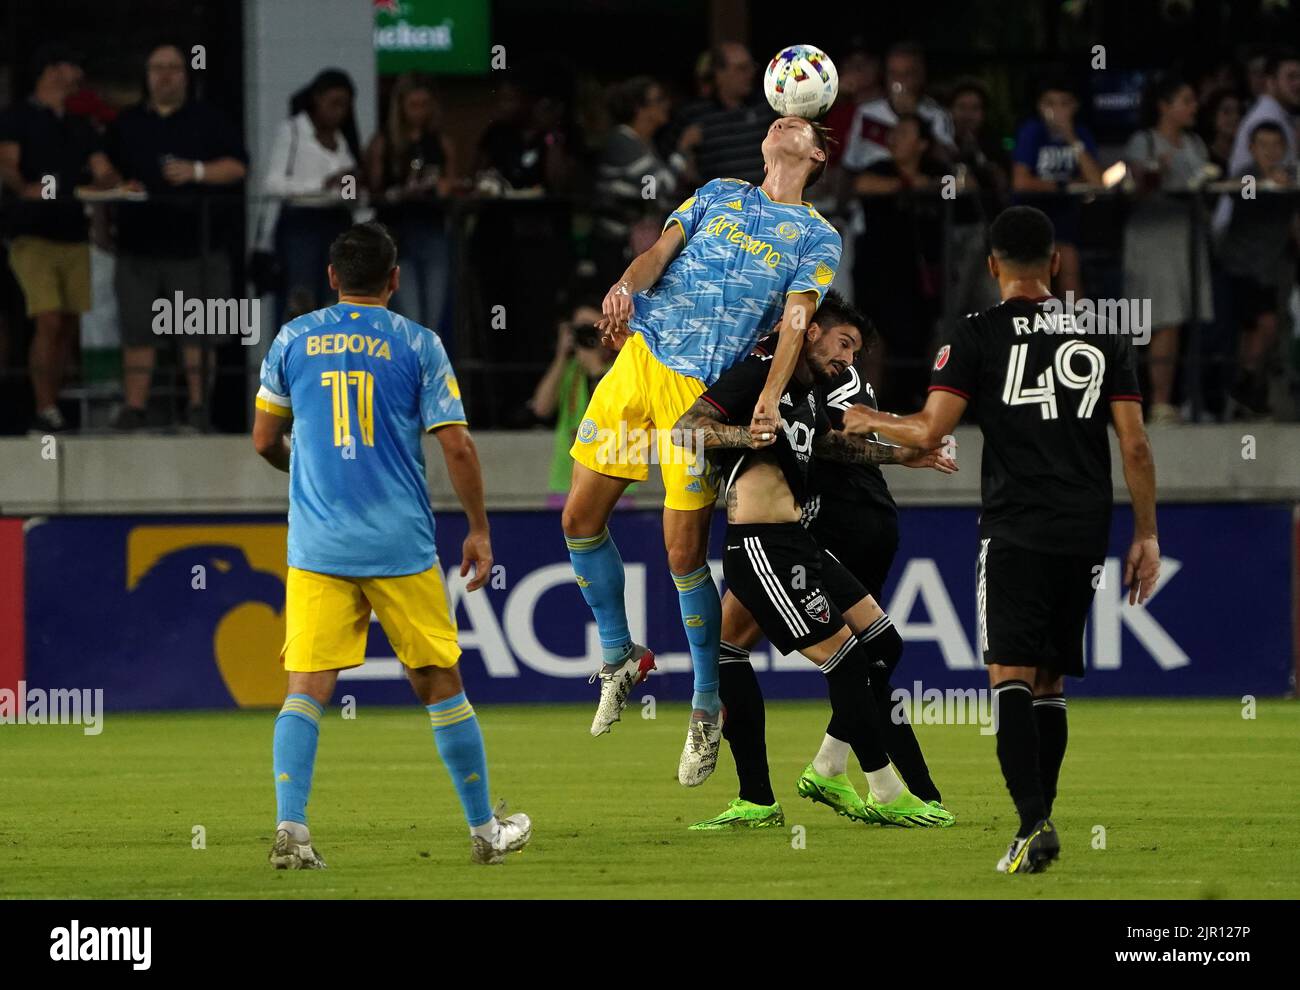 WASHINGTON, DC, USA - 20 AUGUST 2022: Philadelphia Union defender Jack Elliott (3) heads over D.C. United forward Taxiarchis Fountas (11) during a MLS match between D.C United and the Philadelphia Union on August 20, 2022, at Audi Field, in Washington, DC. (Photo by Tony Quinn-Alamy Live News) Stock Photo